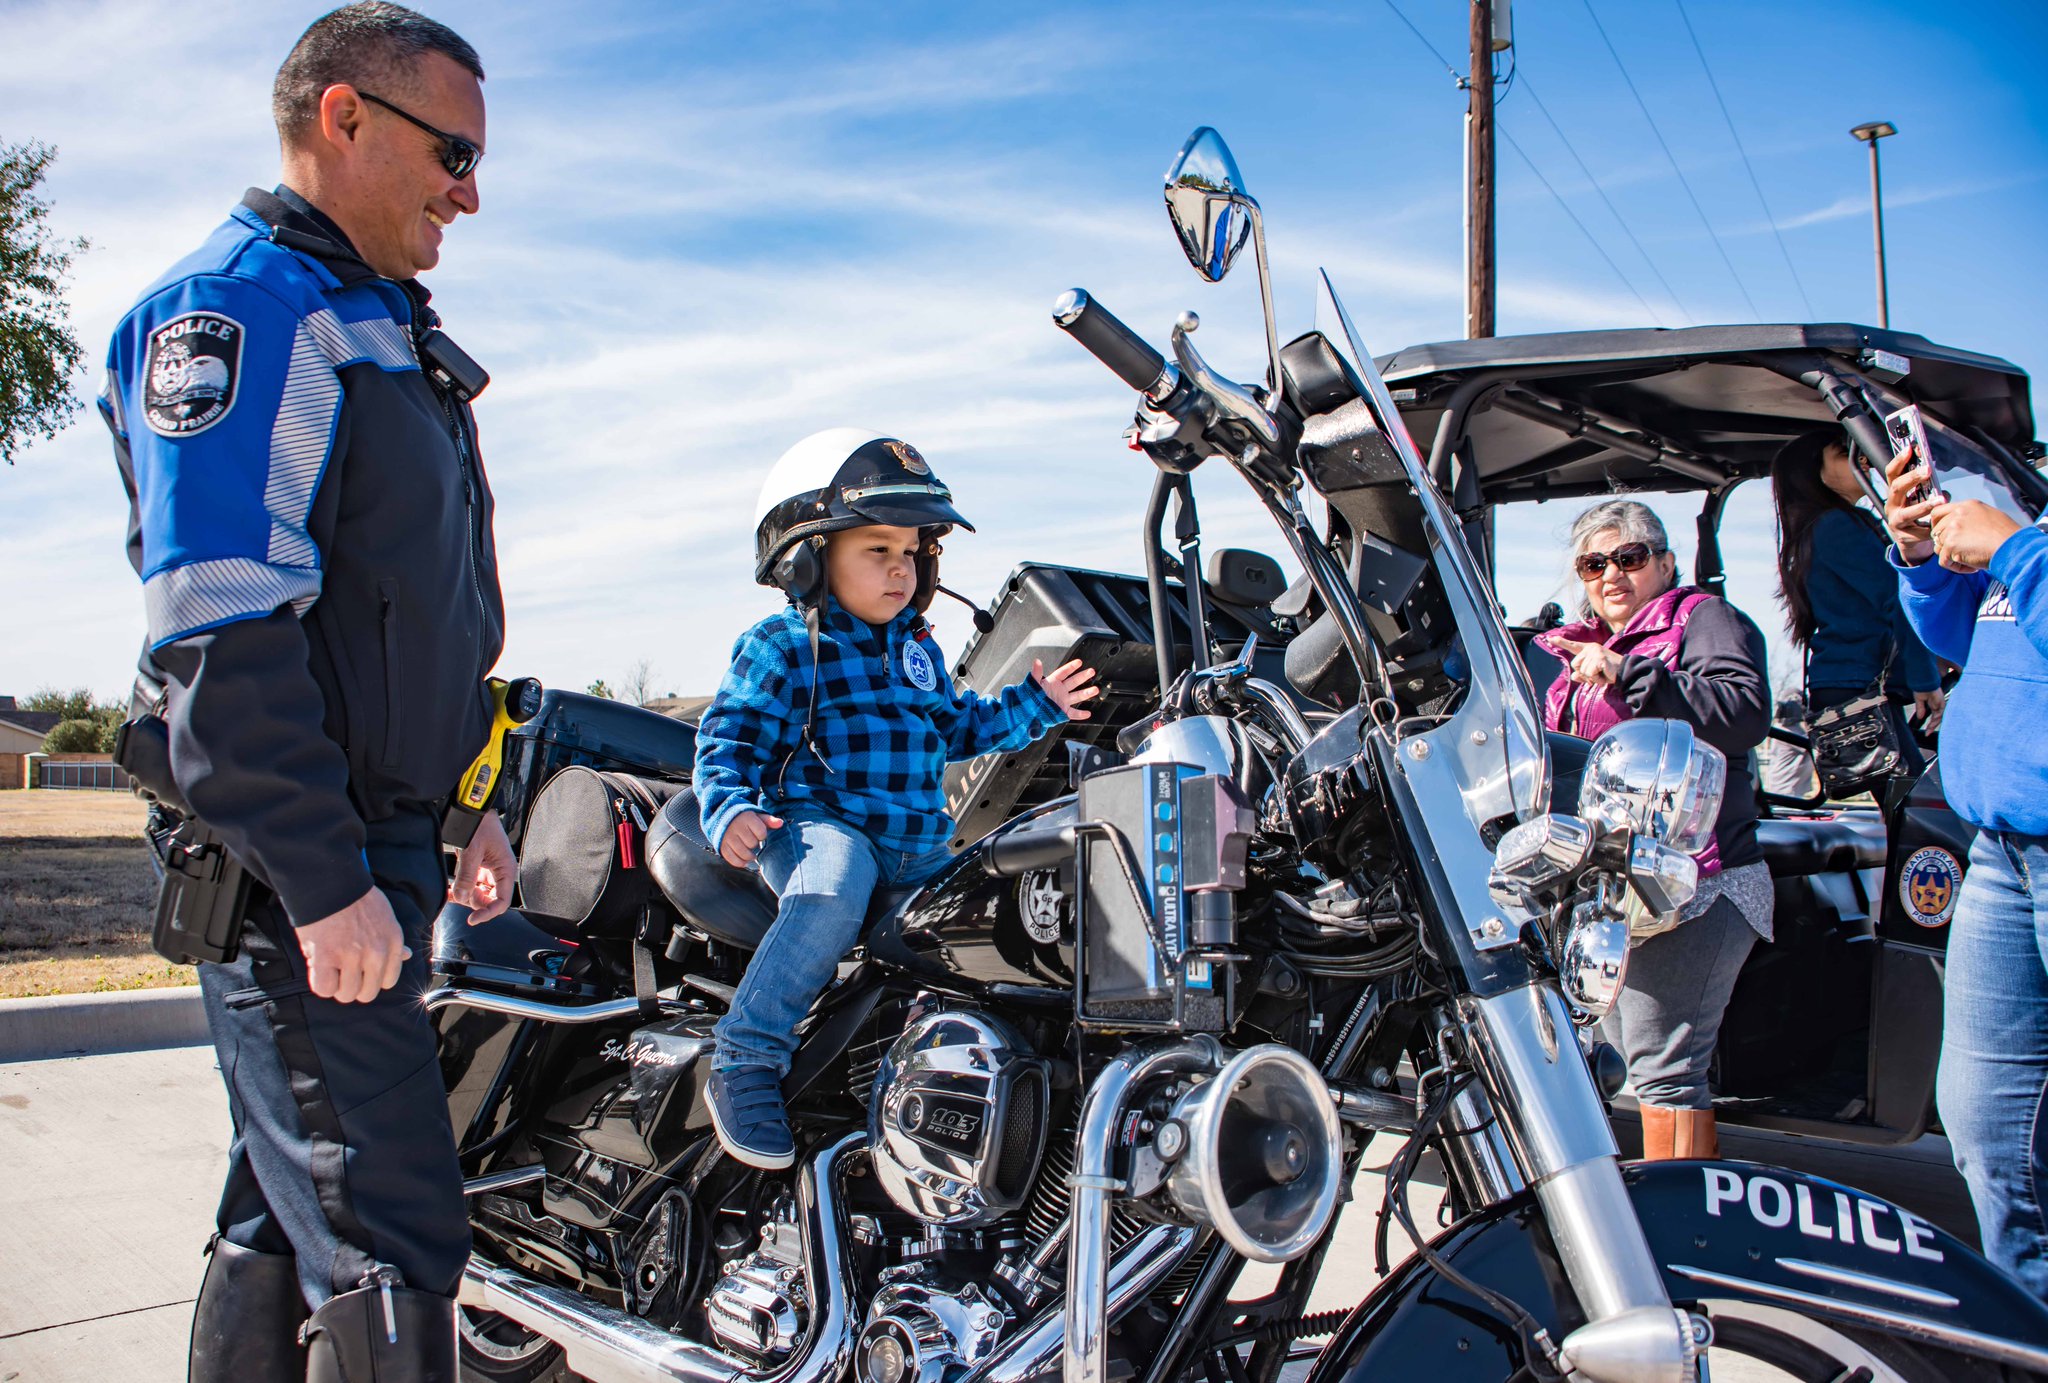 A young boy is wearing a police helmet and sitting on a police motorcycle. A police officer and the boy's parents are watching closely